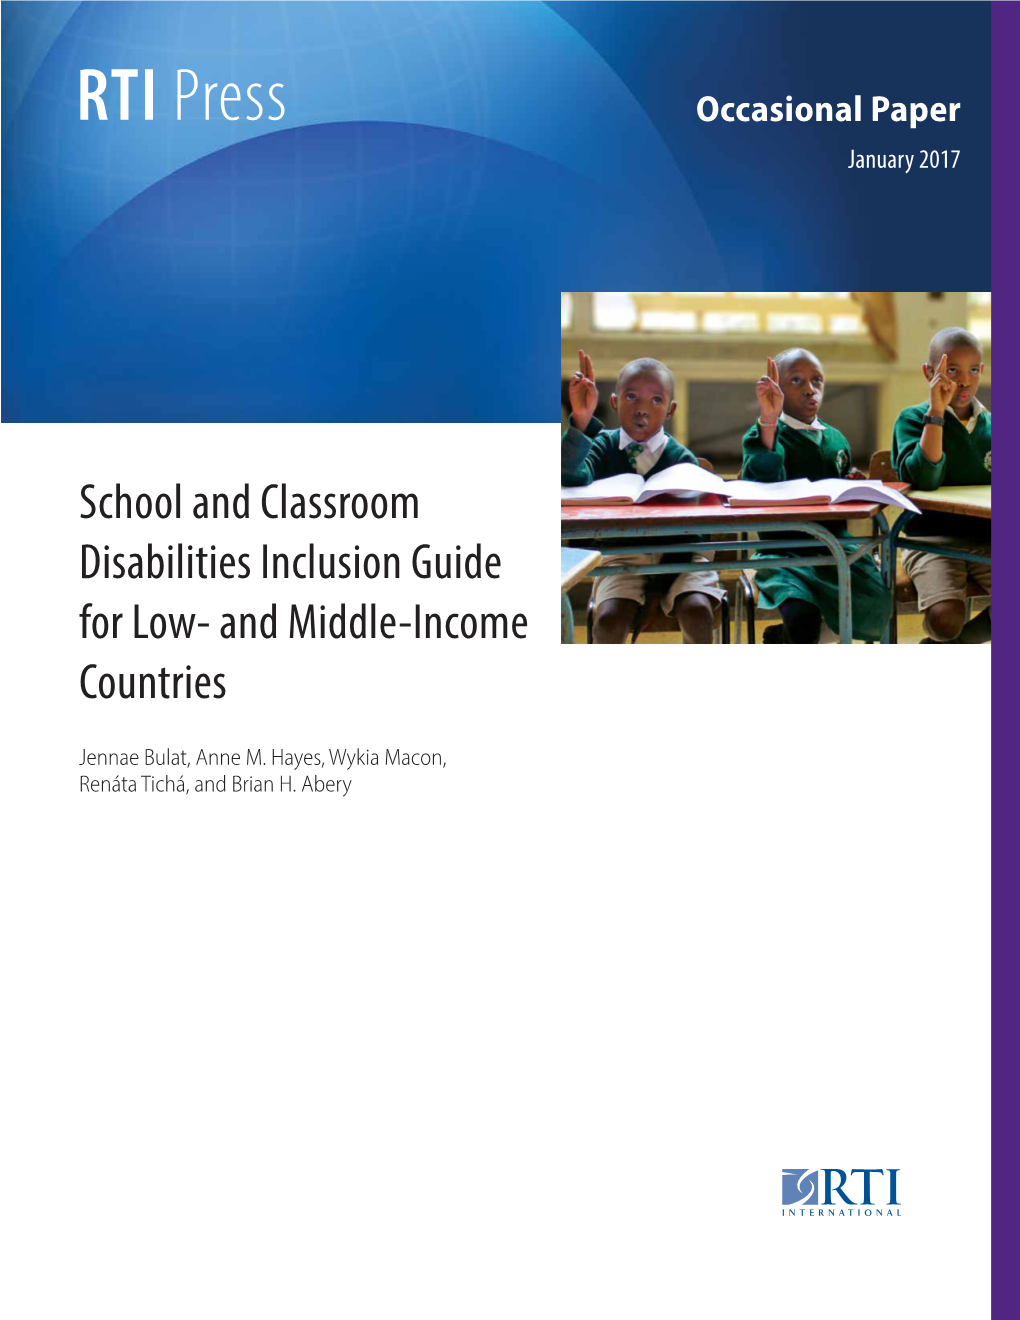 School and Classroom Disabilities Inclusion Guide for Low- and Middle-Income Countries